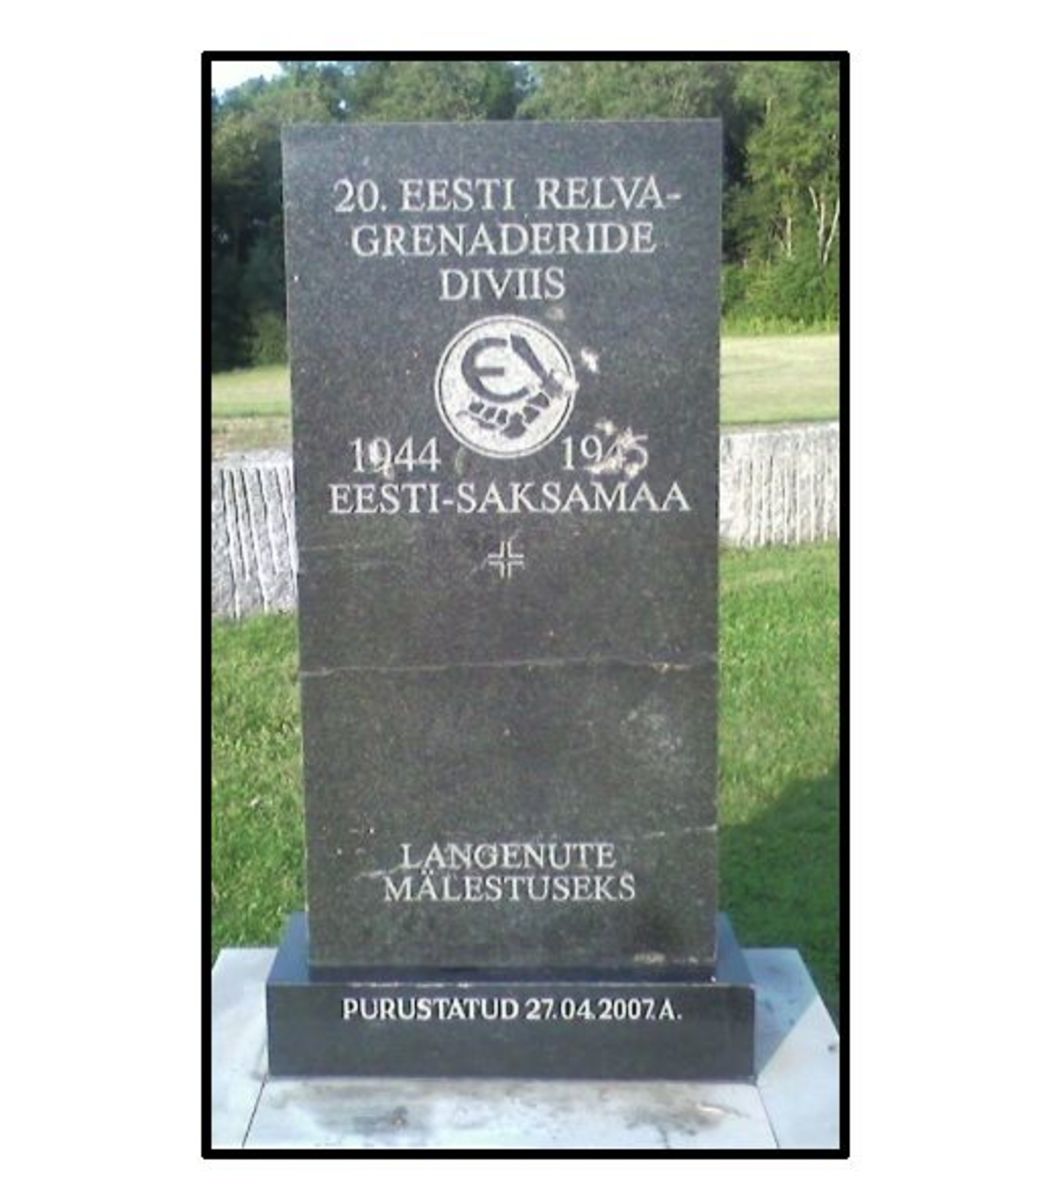 The marker for 20th Waffen Grenadier Division of the SS as part of SS memorial at the Sinimae, Estonia.